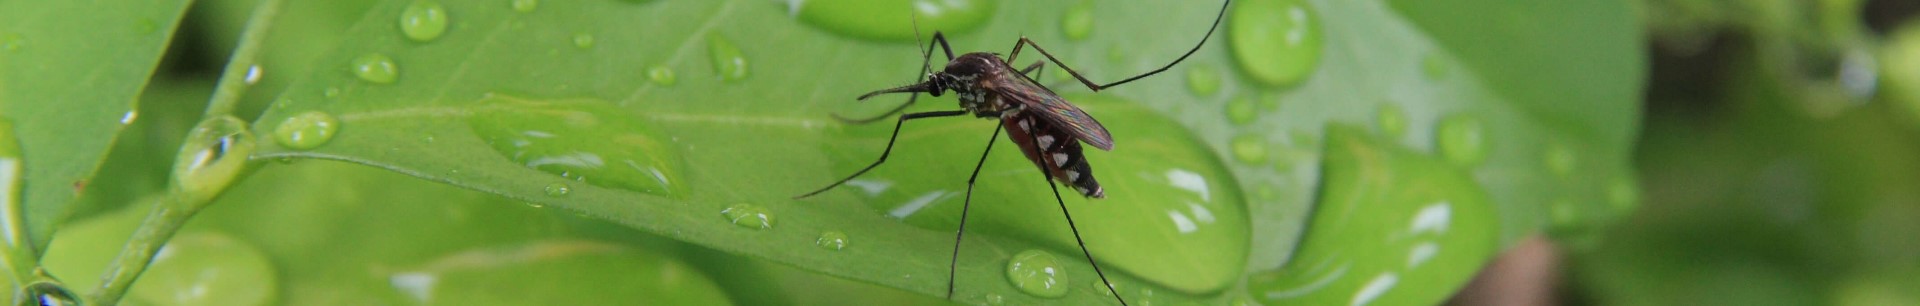 A category header image of a mosquito on a blade of grass